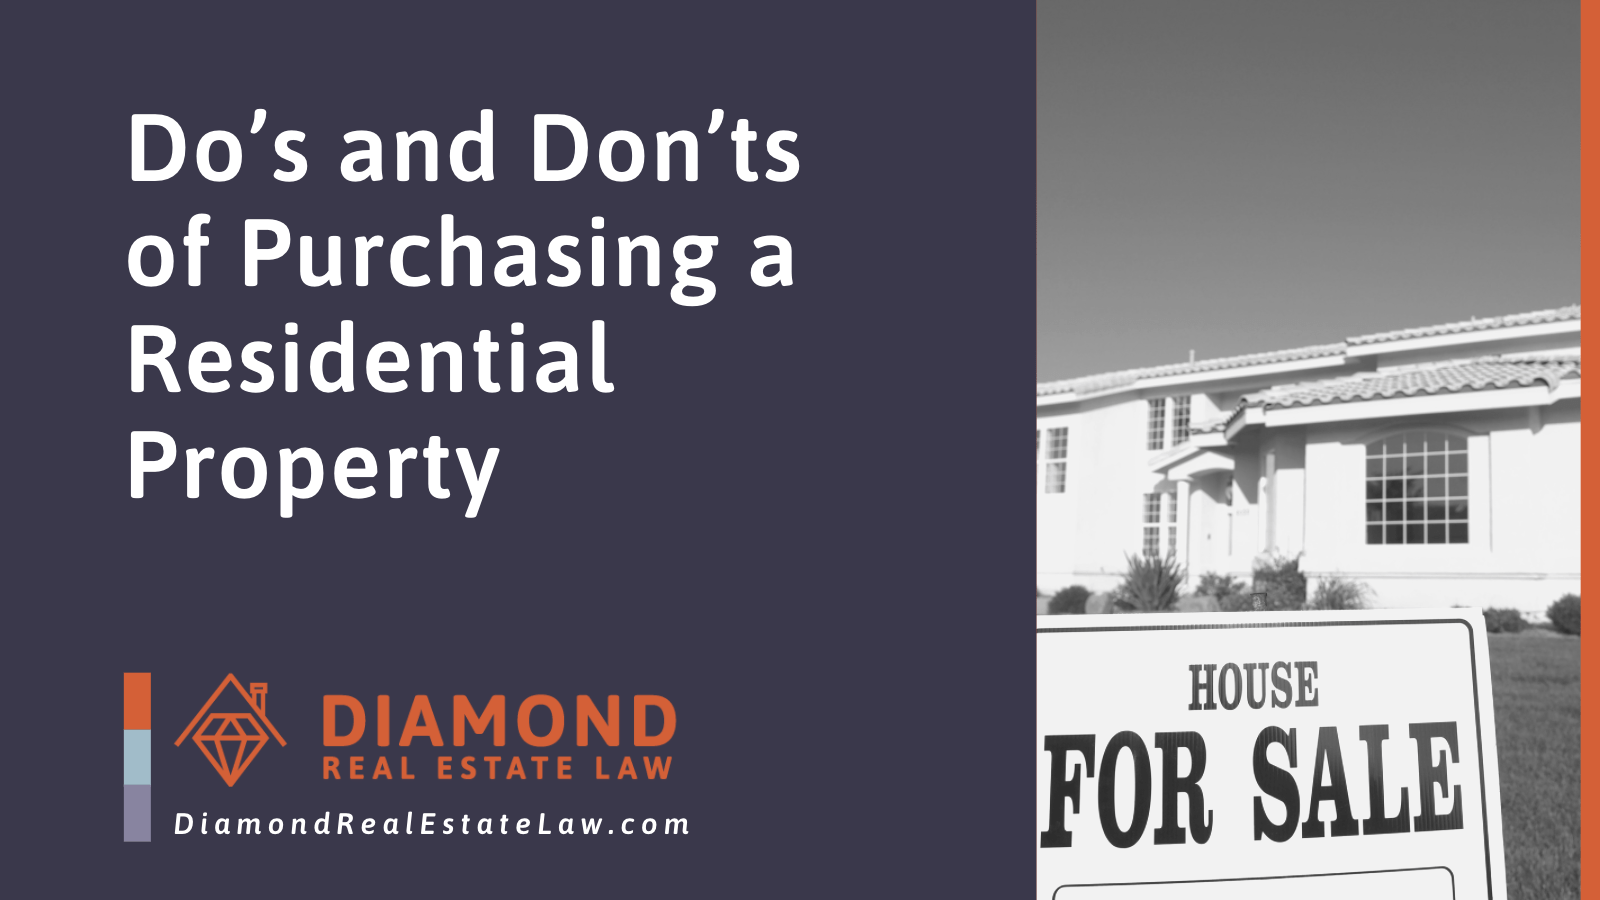 Do’s and Don’ts of Purchasing a Residential Property - Diamond Real Estate Law | McHenry, IL Residential Real Estate Lawyer